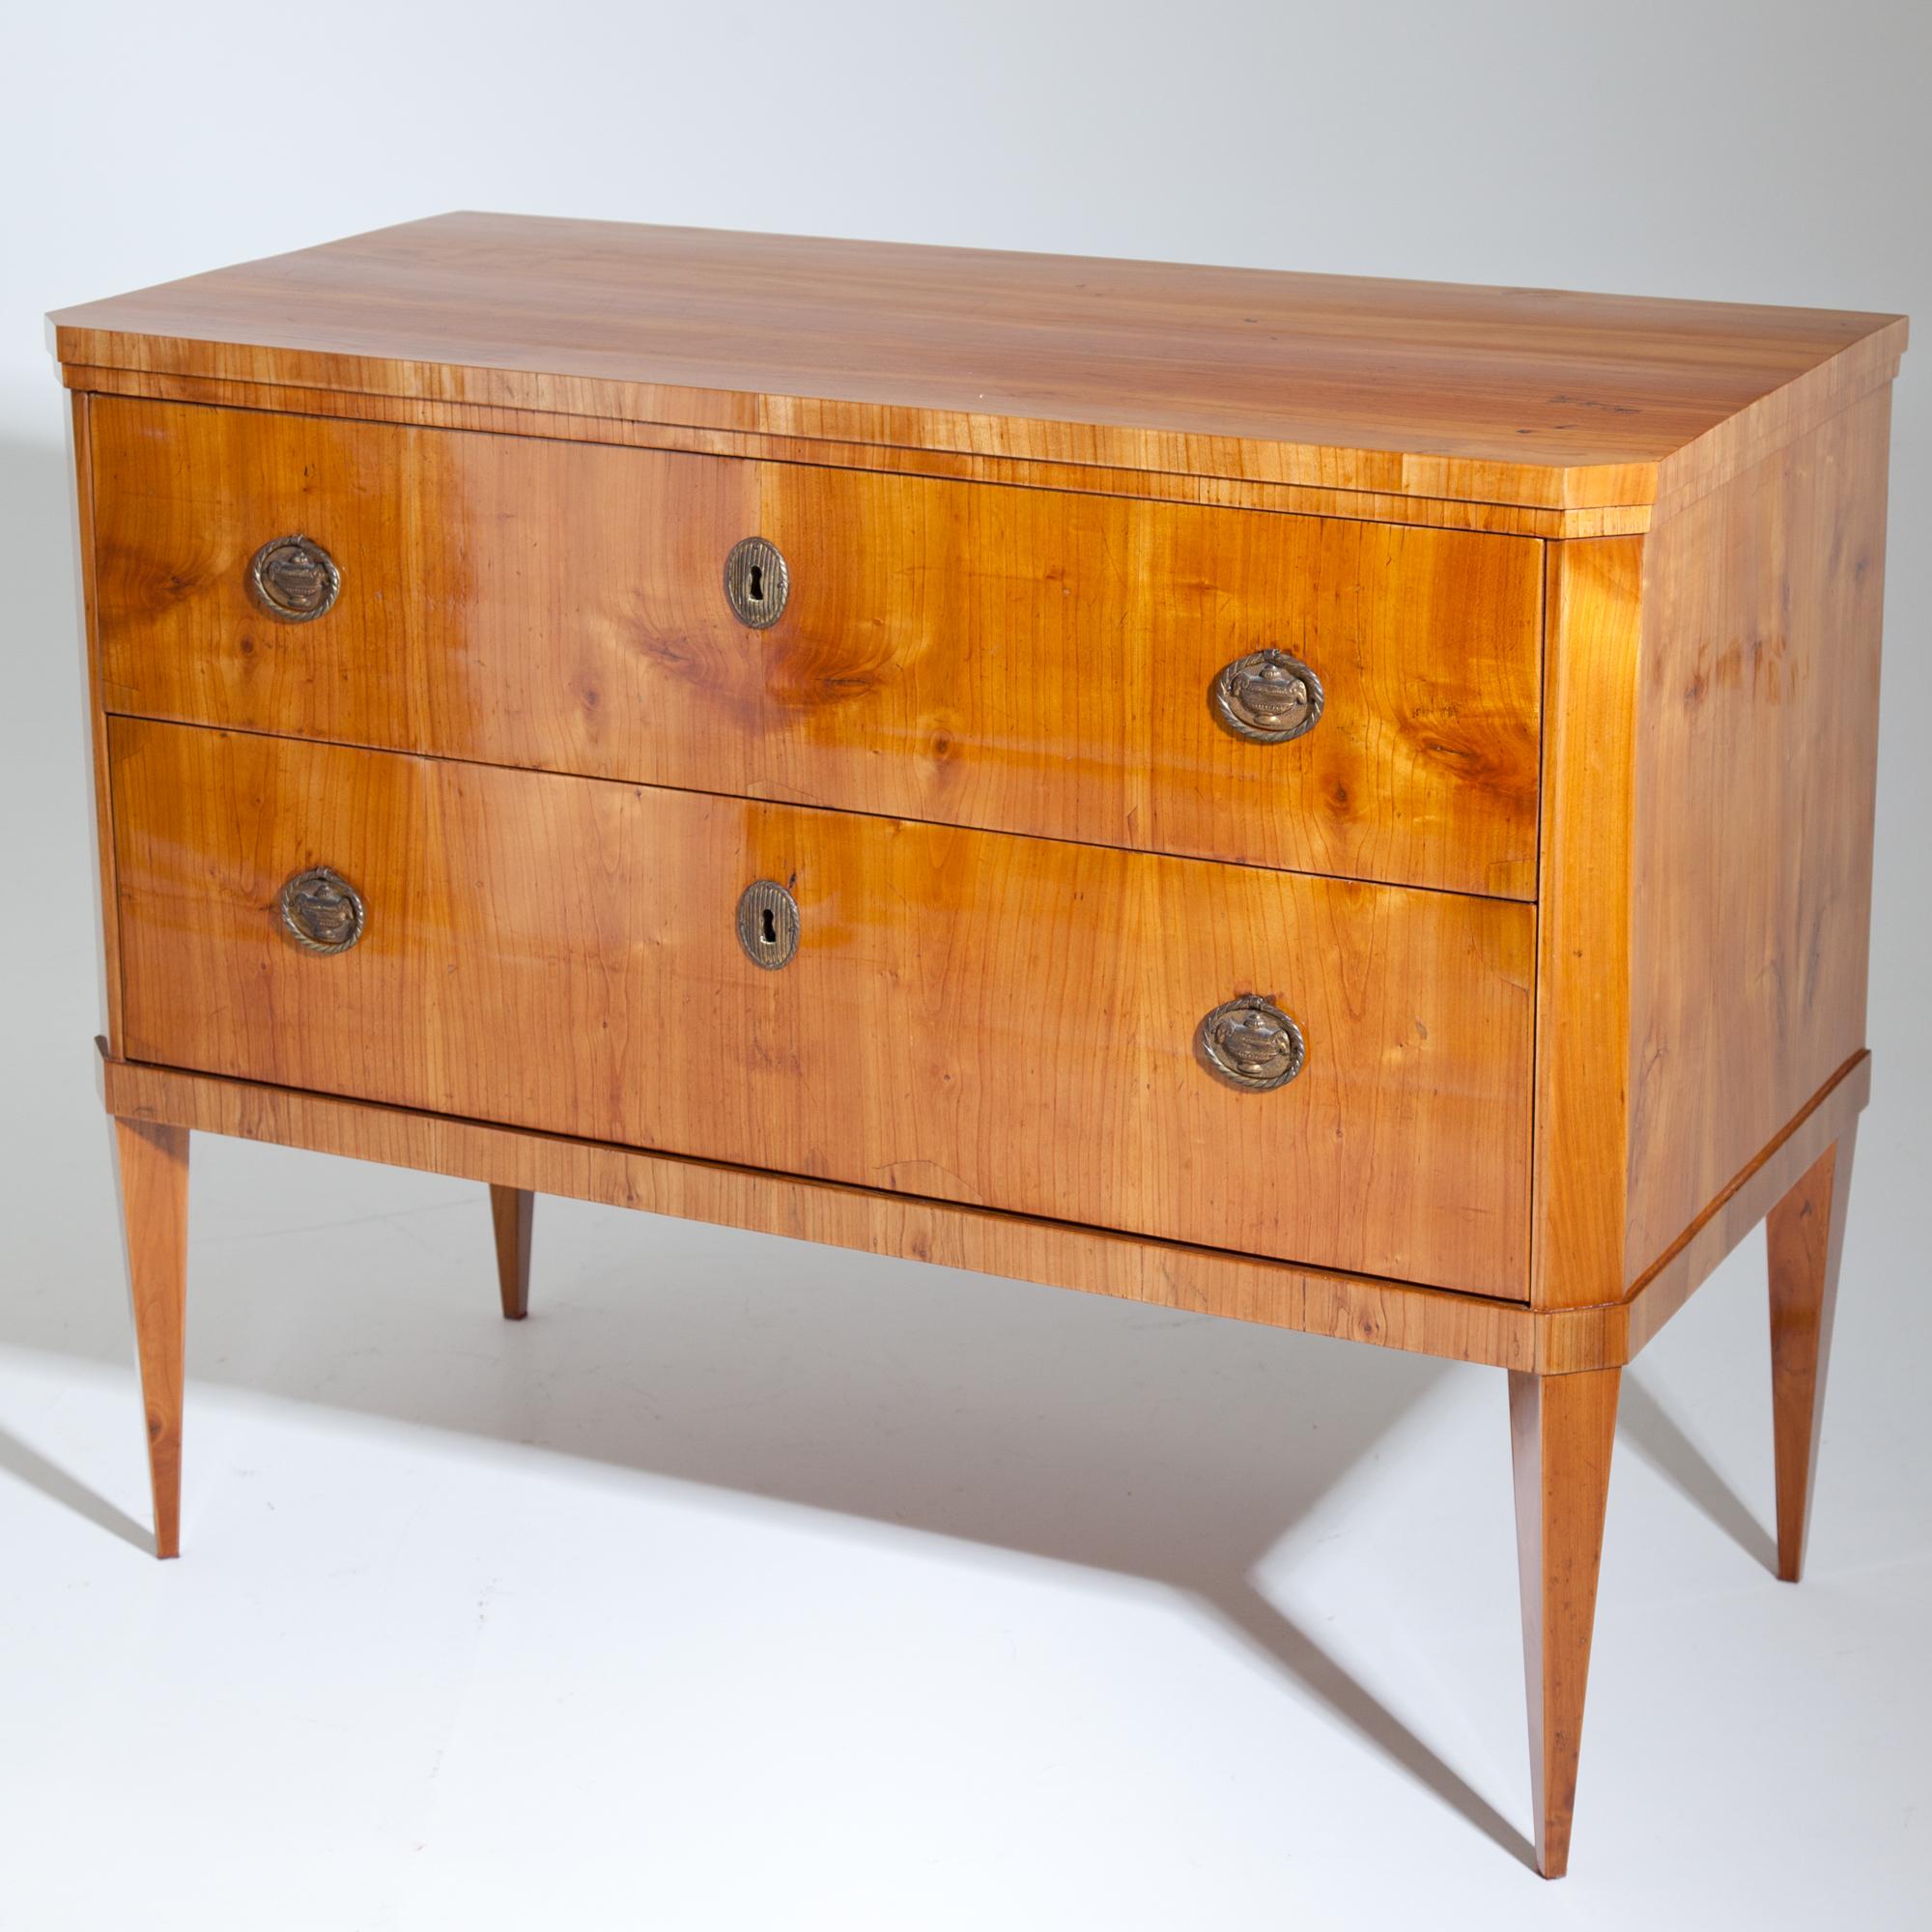 Two-drawered chest of drawers with bevelled corners, veneered in cherry, standing on tall tapered feet. Brass fittings. Expertly restored condition.